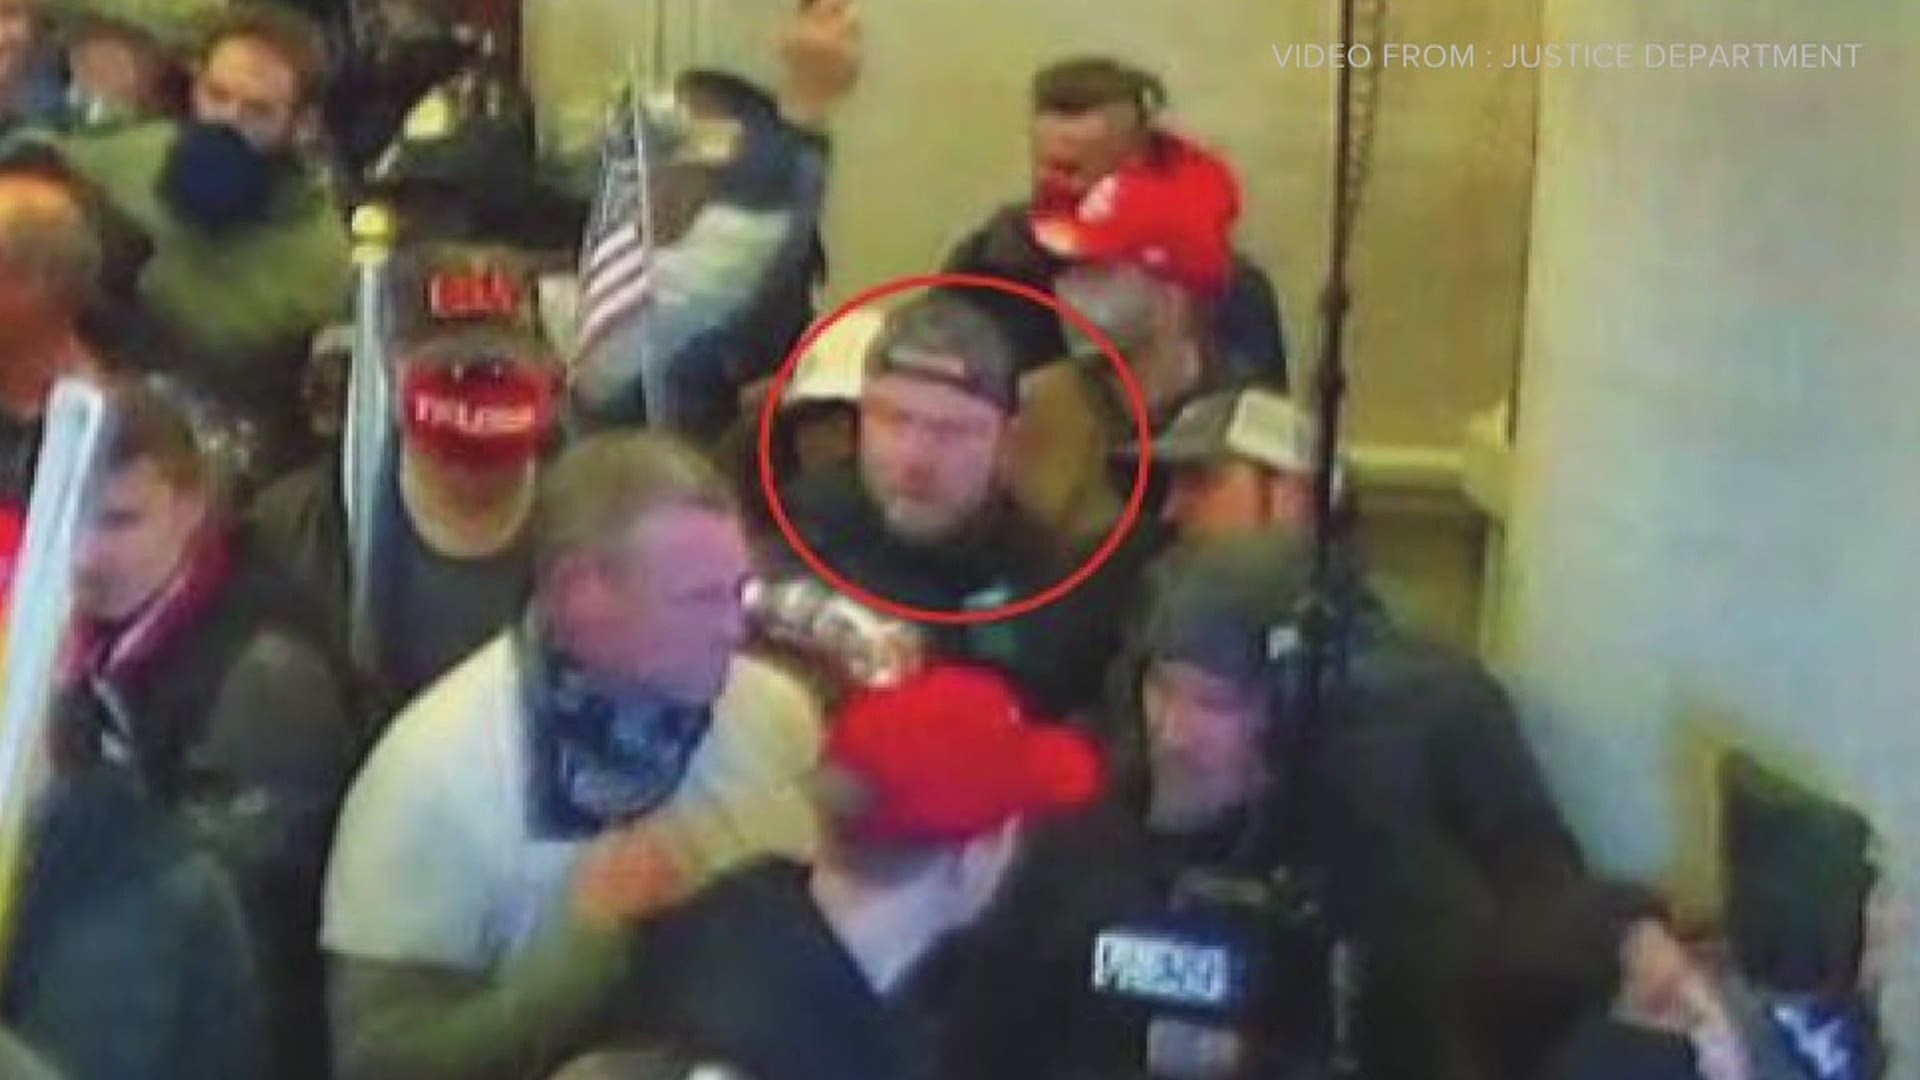 Ethan Nordean, the so-called Sergeant of Arms of the Seattle Chapter of the Proud Boys, was being held at the Federal Detention Center in SeaTac.